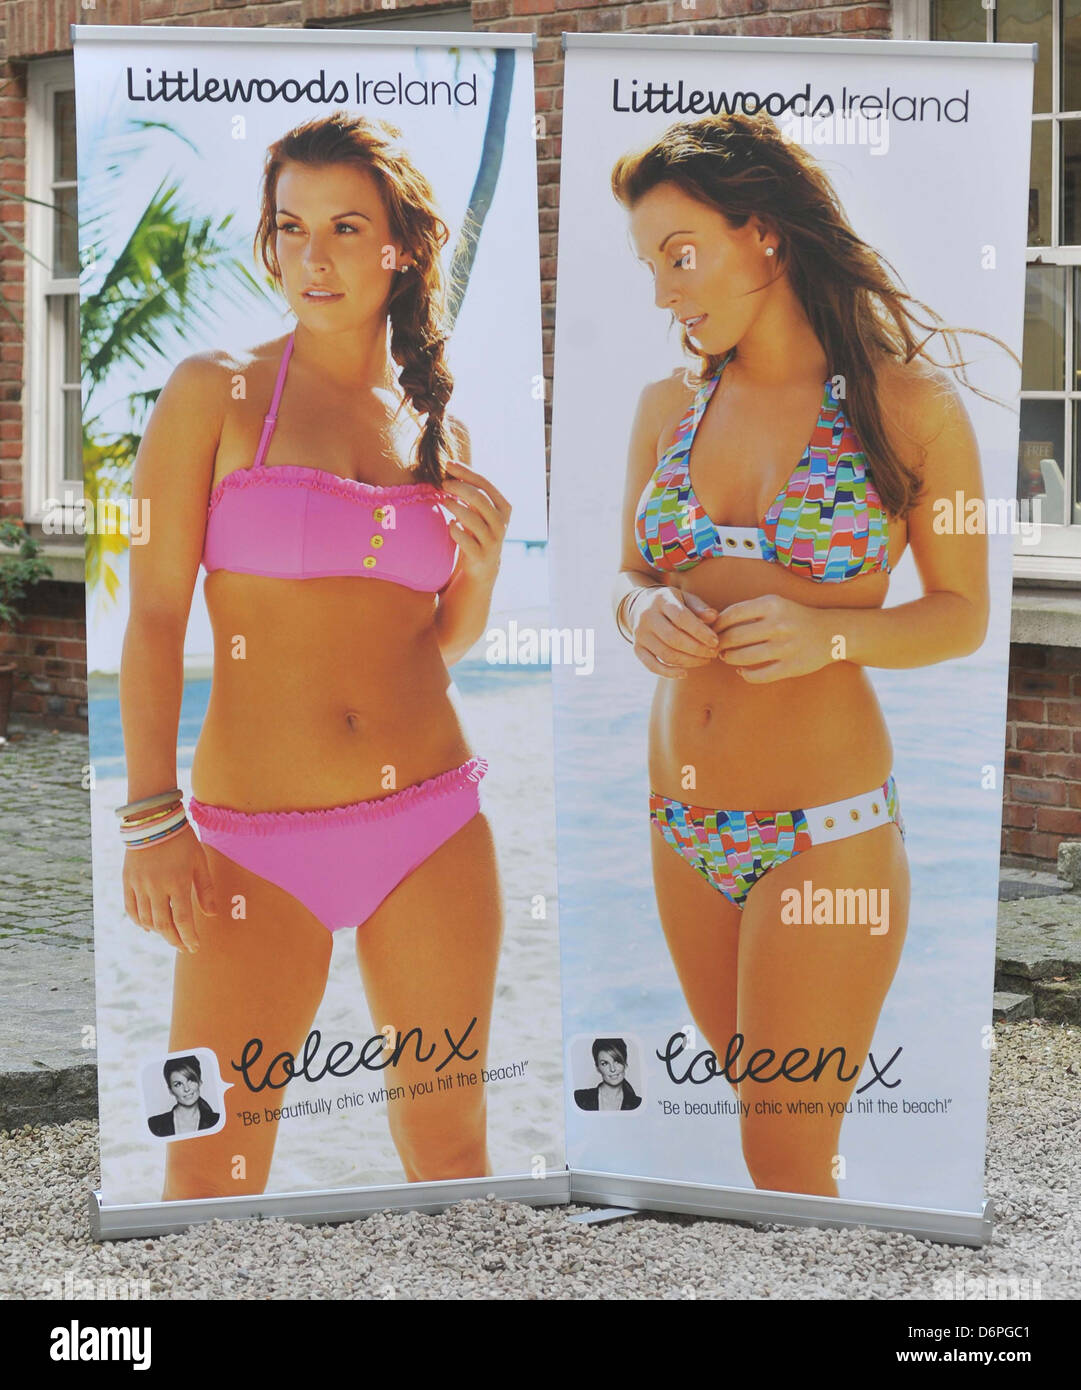 Atmosphere - Poster Coleen Rooney launches her first ever Swimwear Range  for Littlewoods in Ireland Dublin, Ireland - 12.03.12 Stock Photo - Alamy